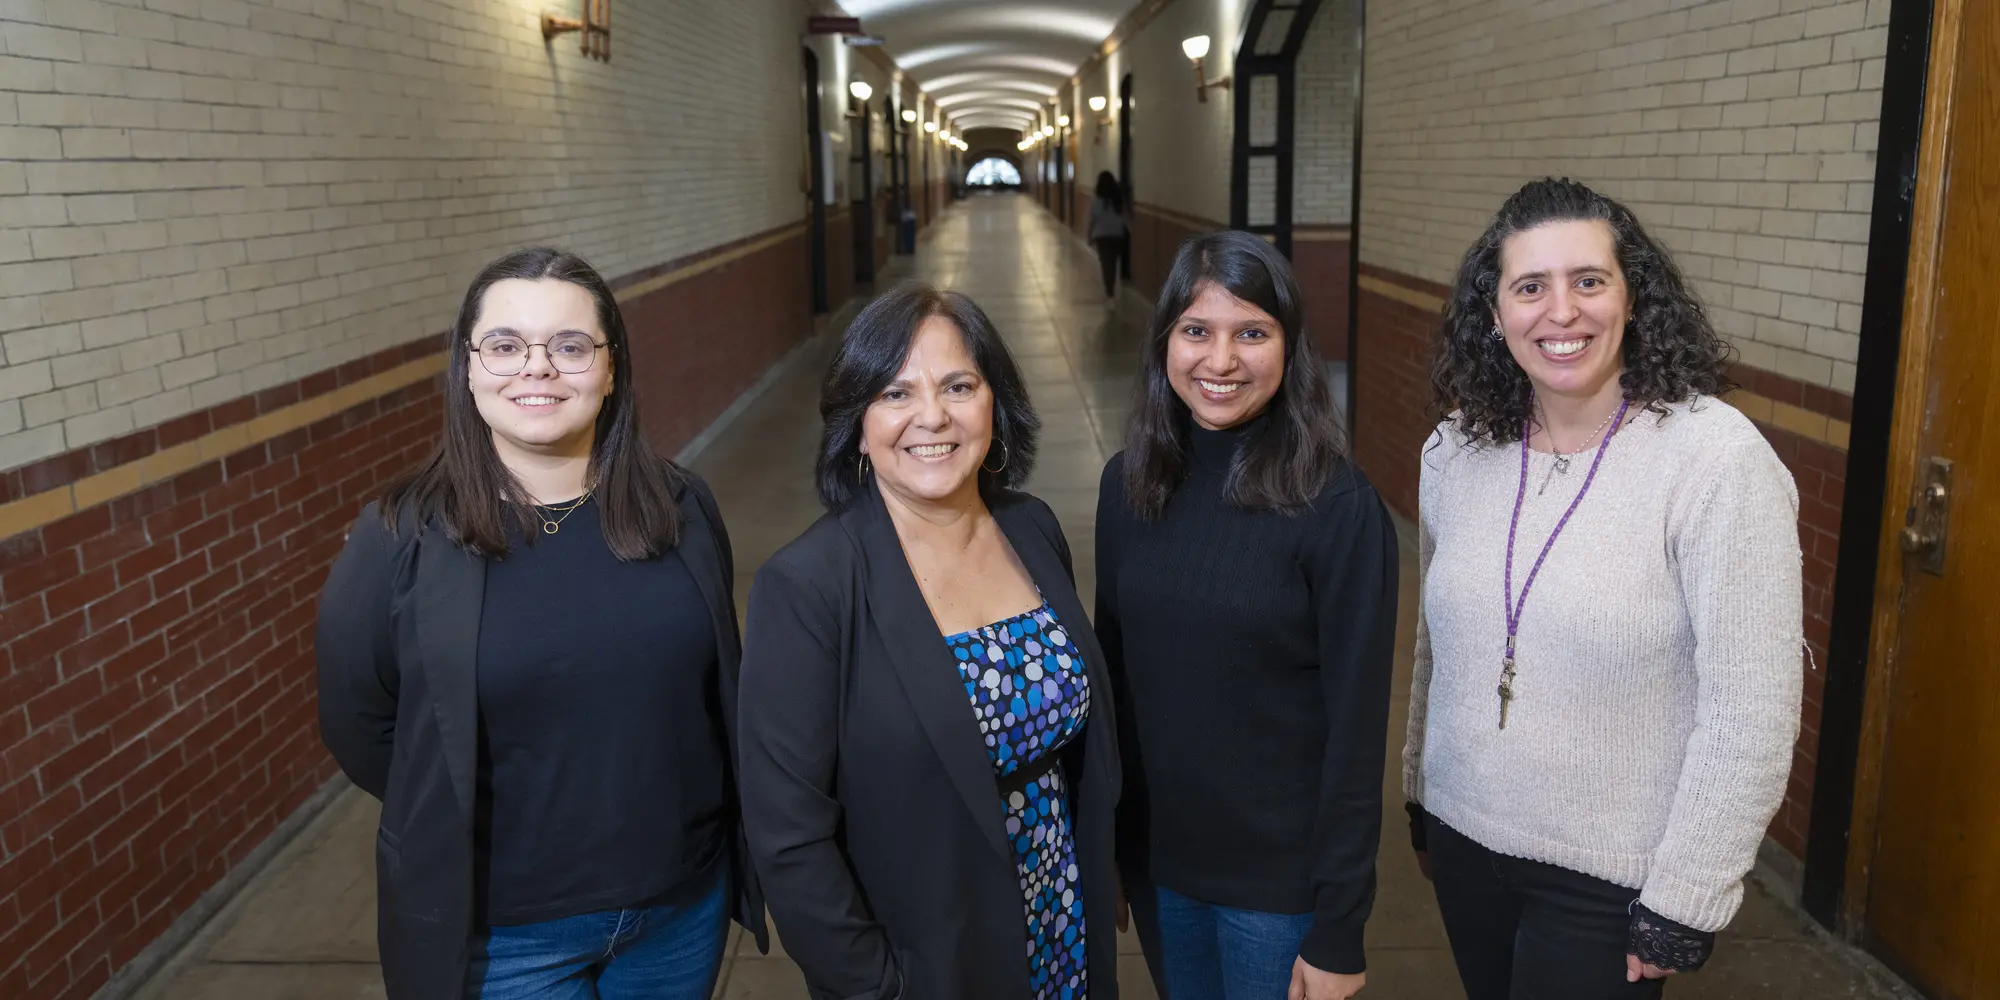 (from left to right) The CMU team consists of Carolina Da Cunha Carreira, a Ph.D. student, Cleotilde Gonzalez, Anu Aggarwal, a research associate, and  Maria Ferreira, a post-doctoral fellow in the Gonzalez lab.